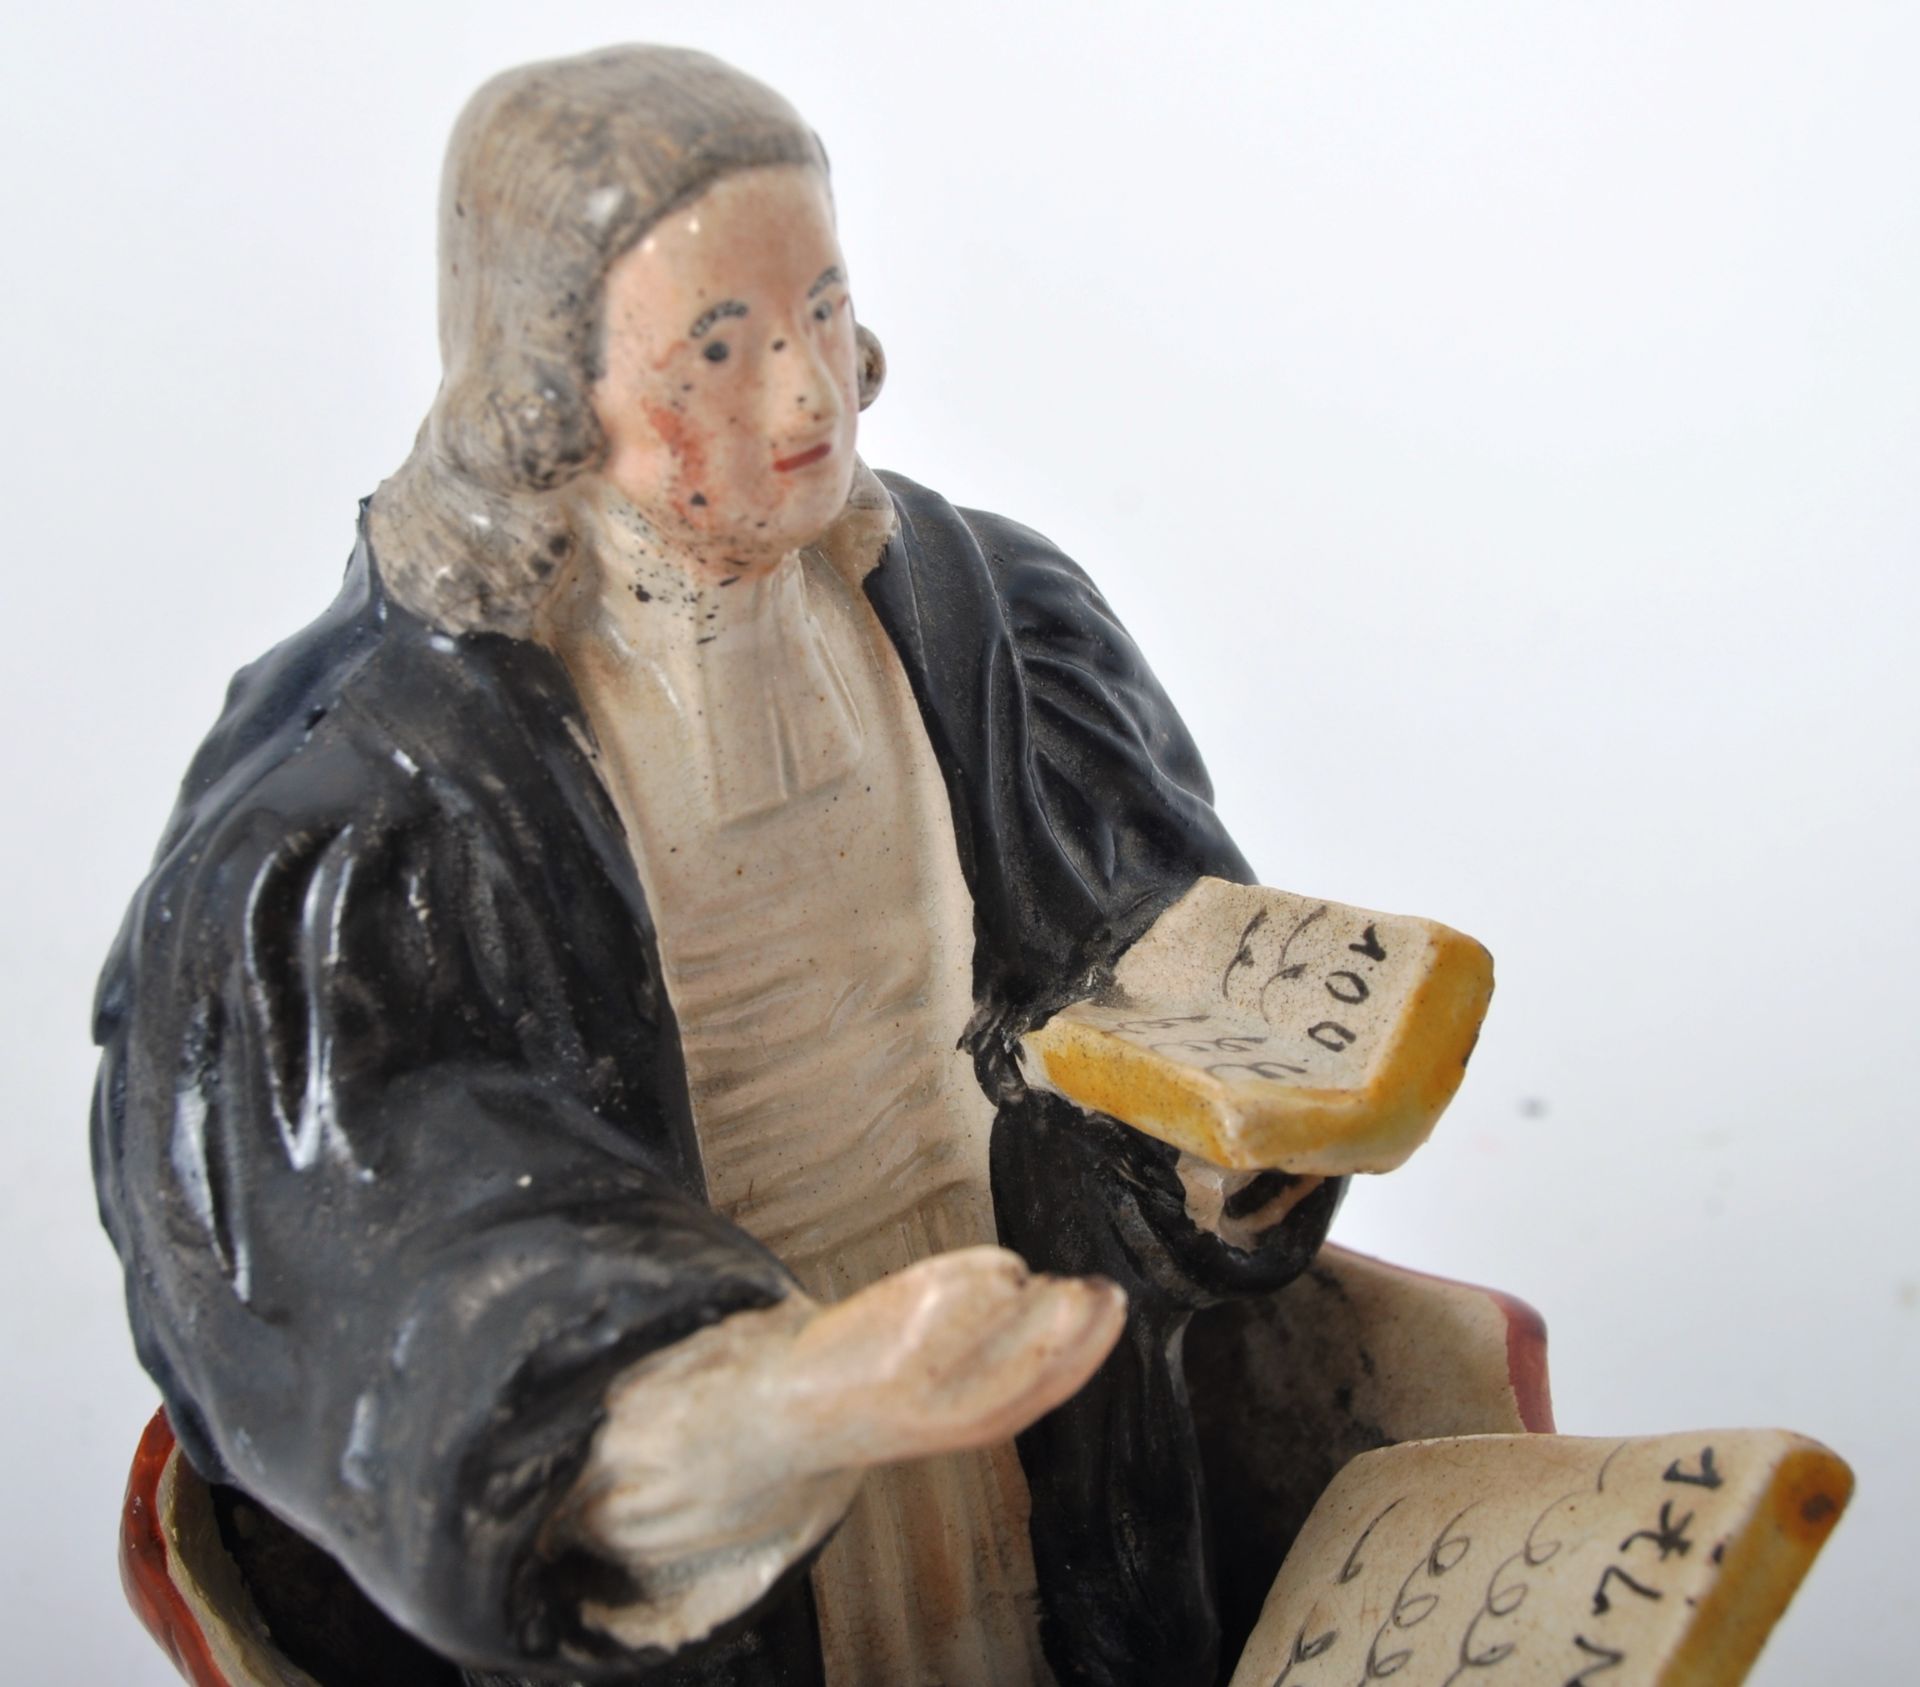 19TH CENTURY VICTORIAN STAFFORDSHIRE FIGURE OF JOHN WESLEY - Image 6 of 7